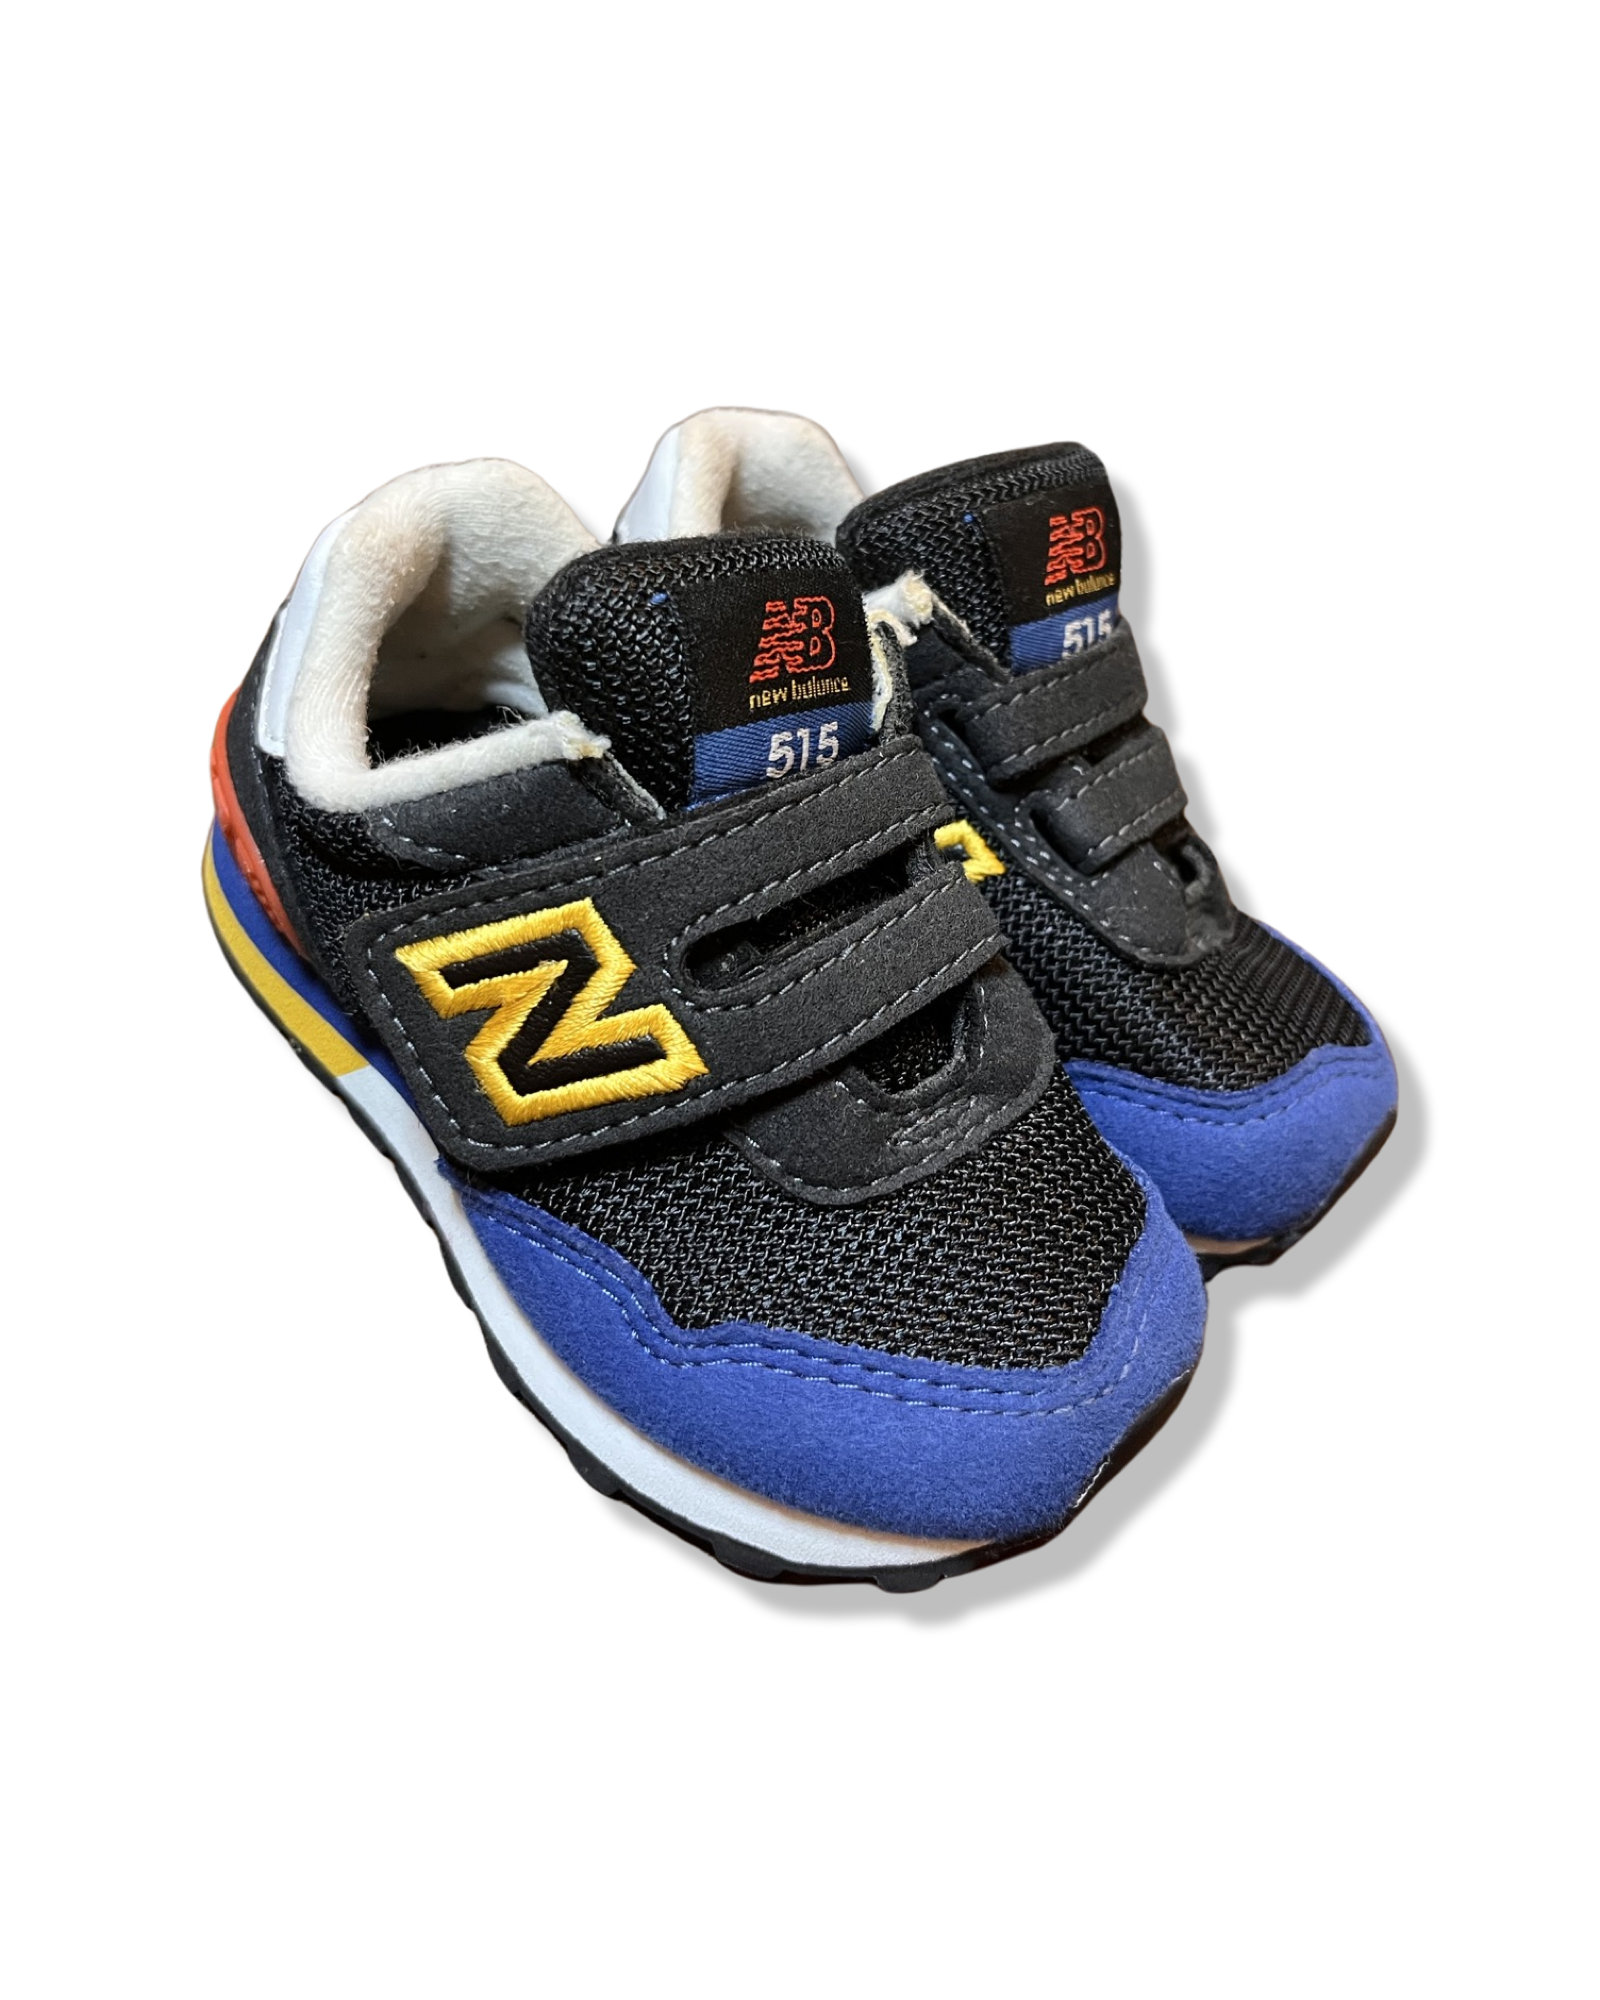 New Balance Sneakers (US 5)